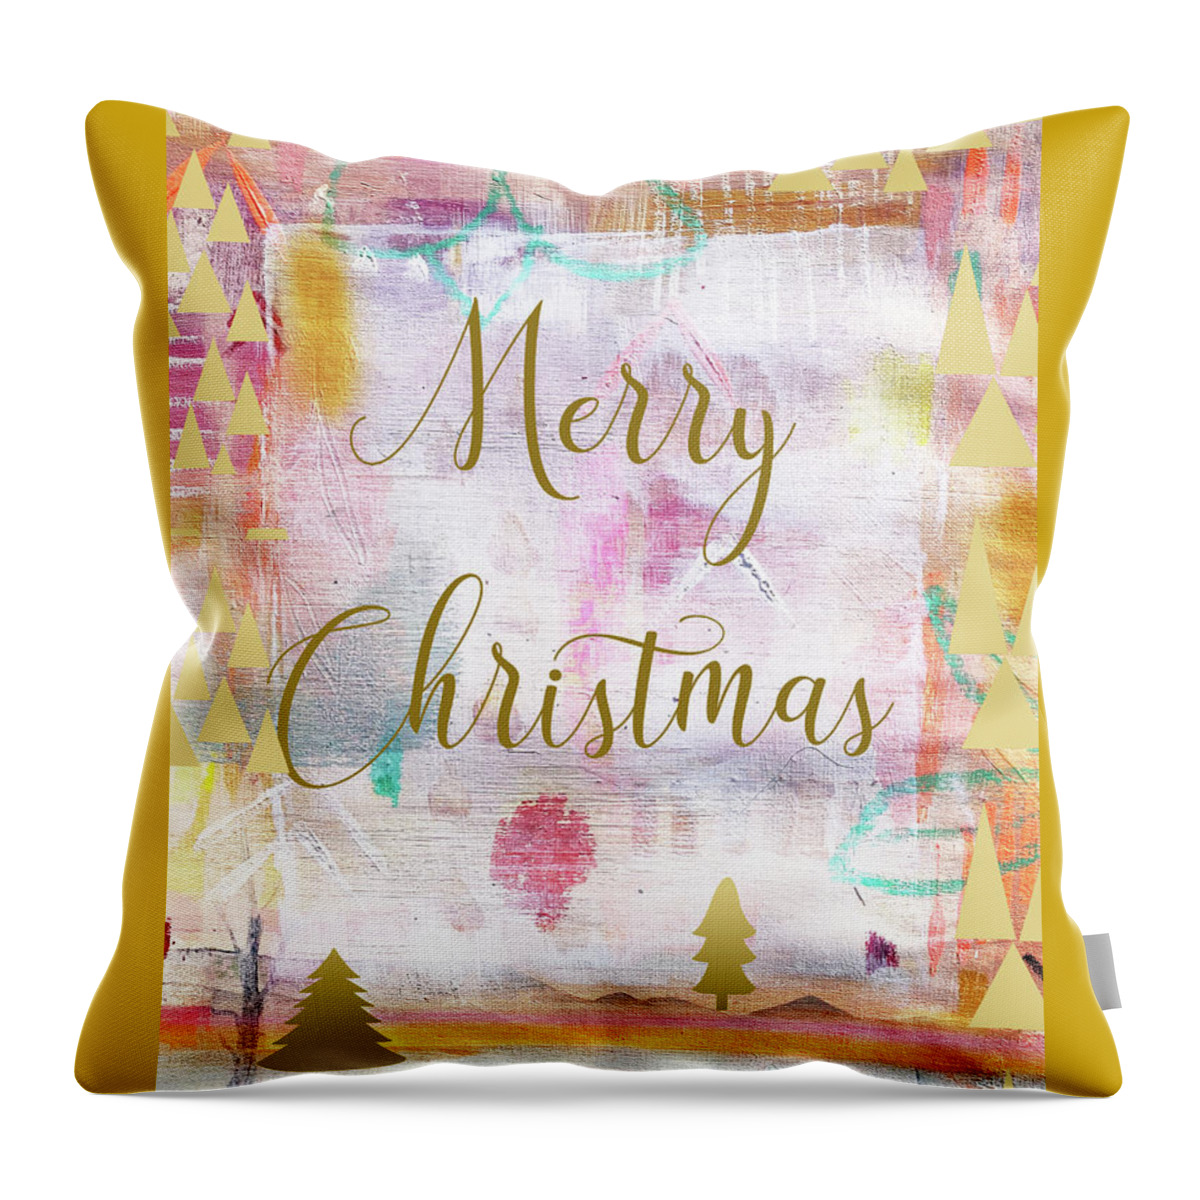 Merry Christmas Throw Pillow featuring the mixed media Merry Christmas by Claudia Schoen